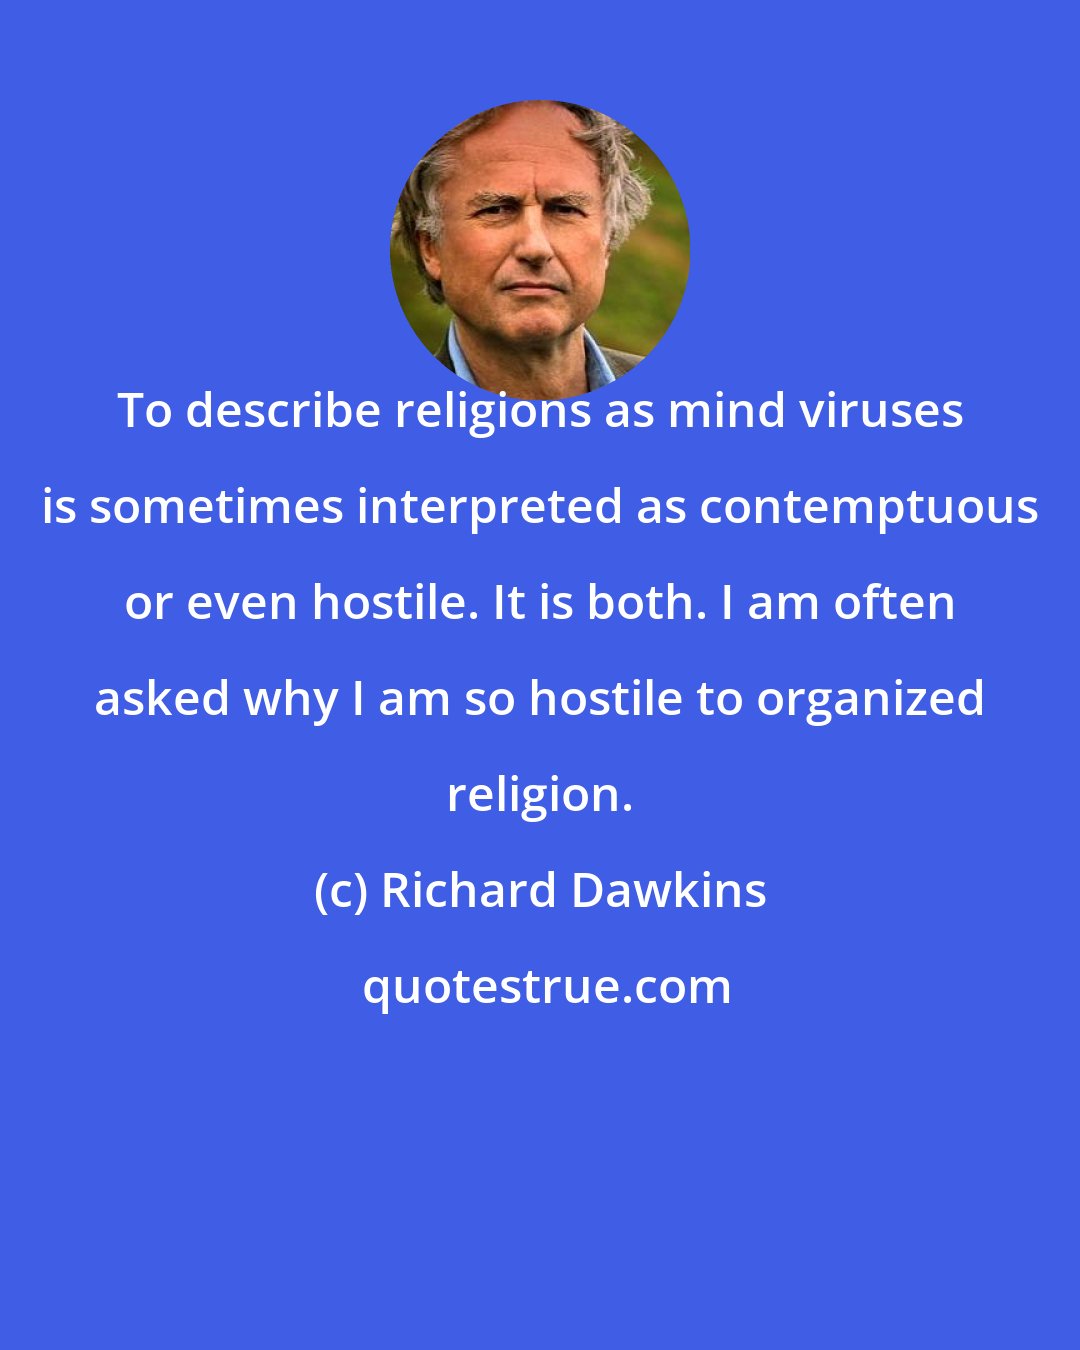 Richard Dawkins: To describe religions as mind viruses is sometimes interpreted as contemptuous or even hostile. It is both. I am often asked why I am so hostile to organized religion.